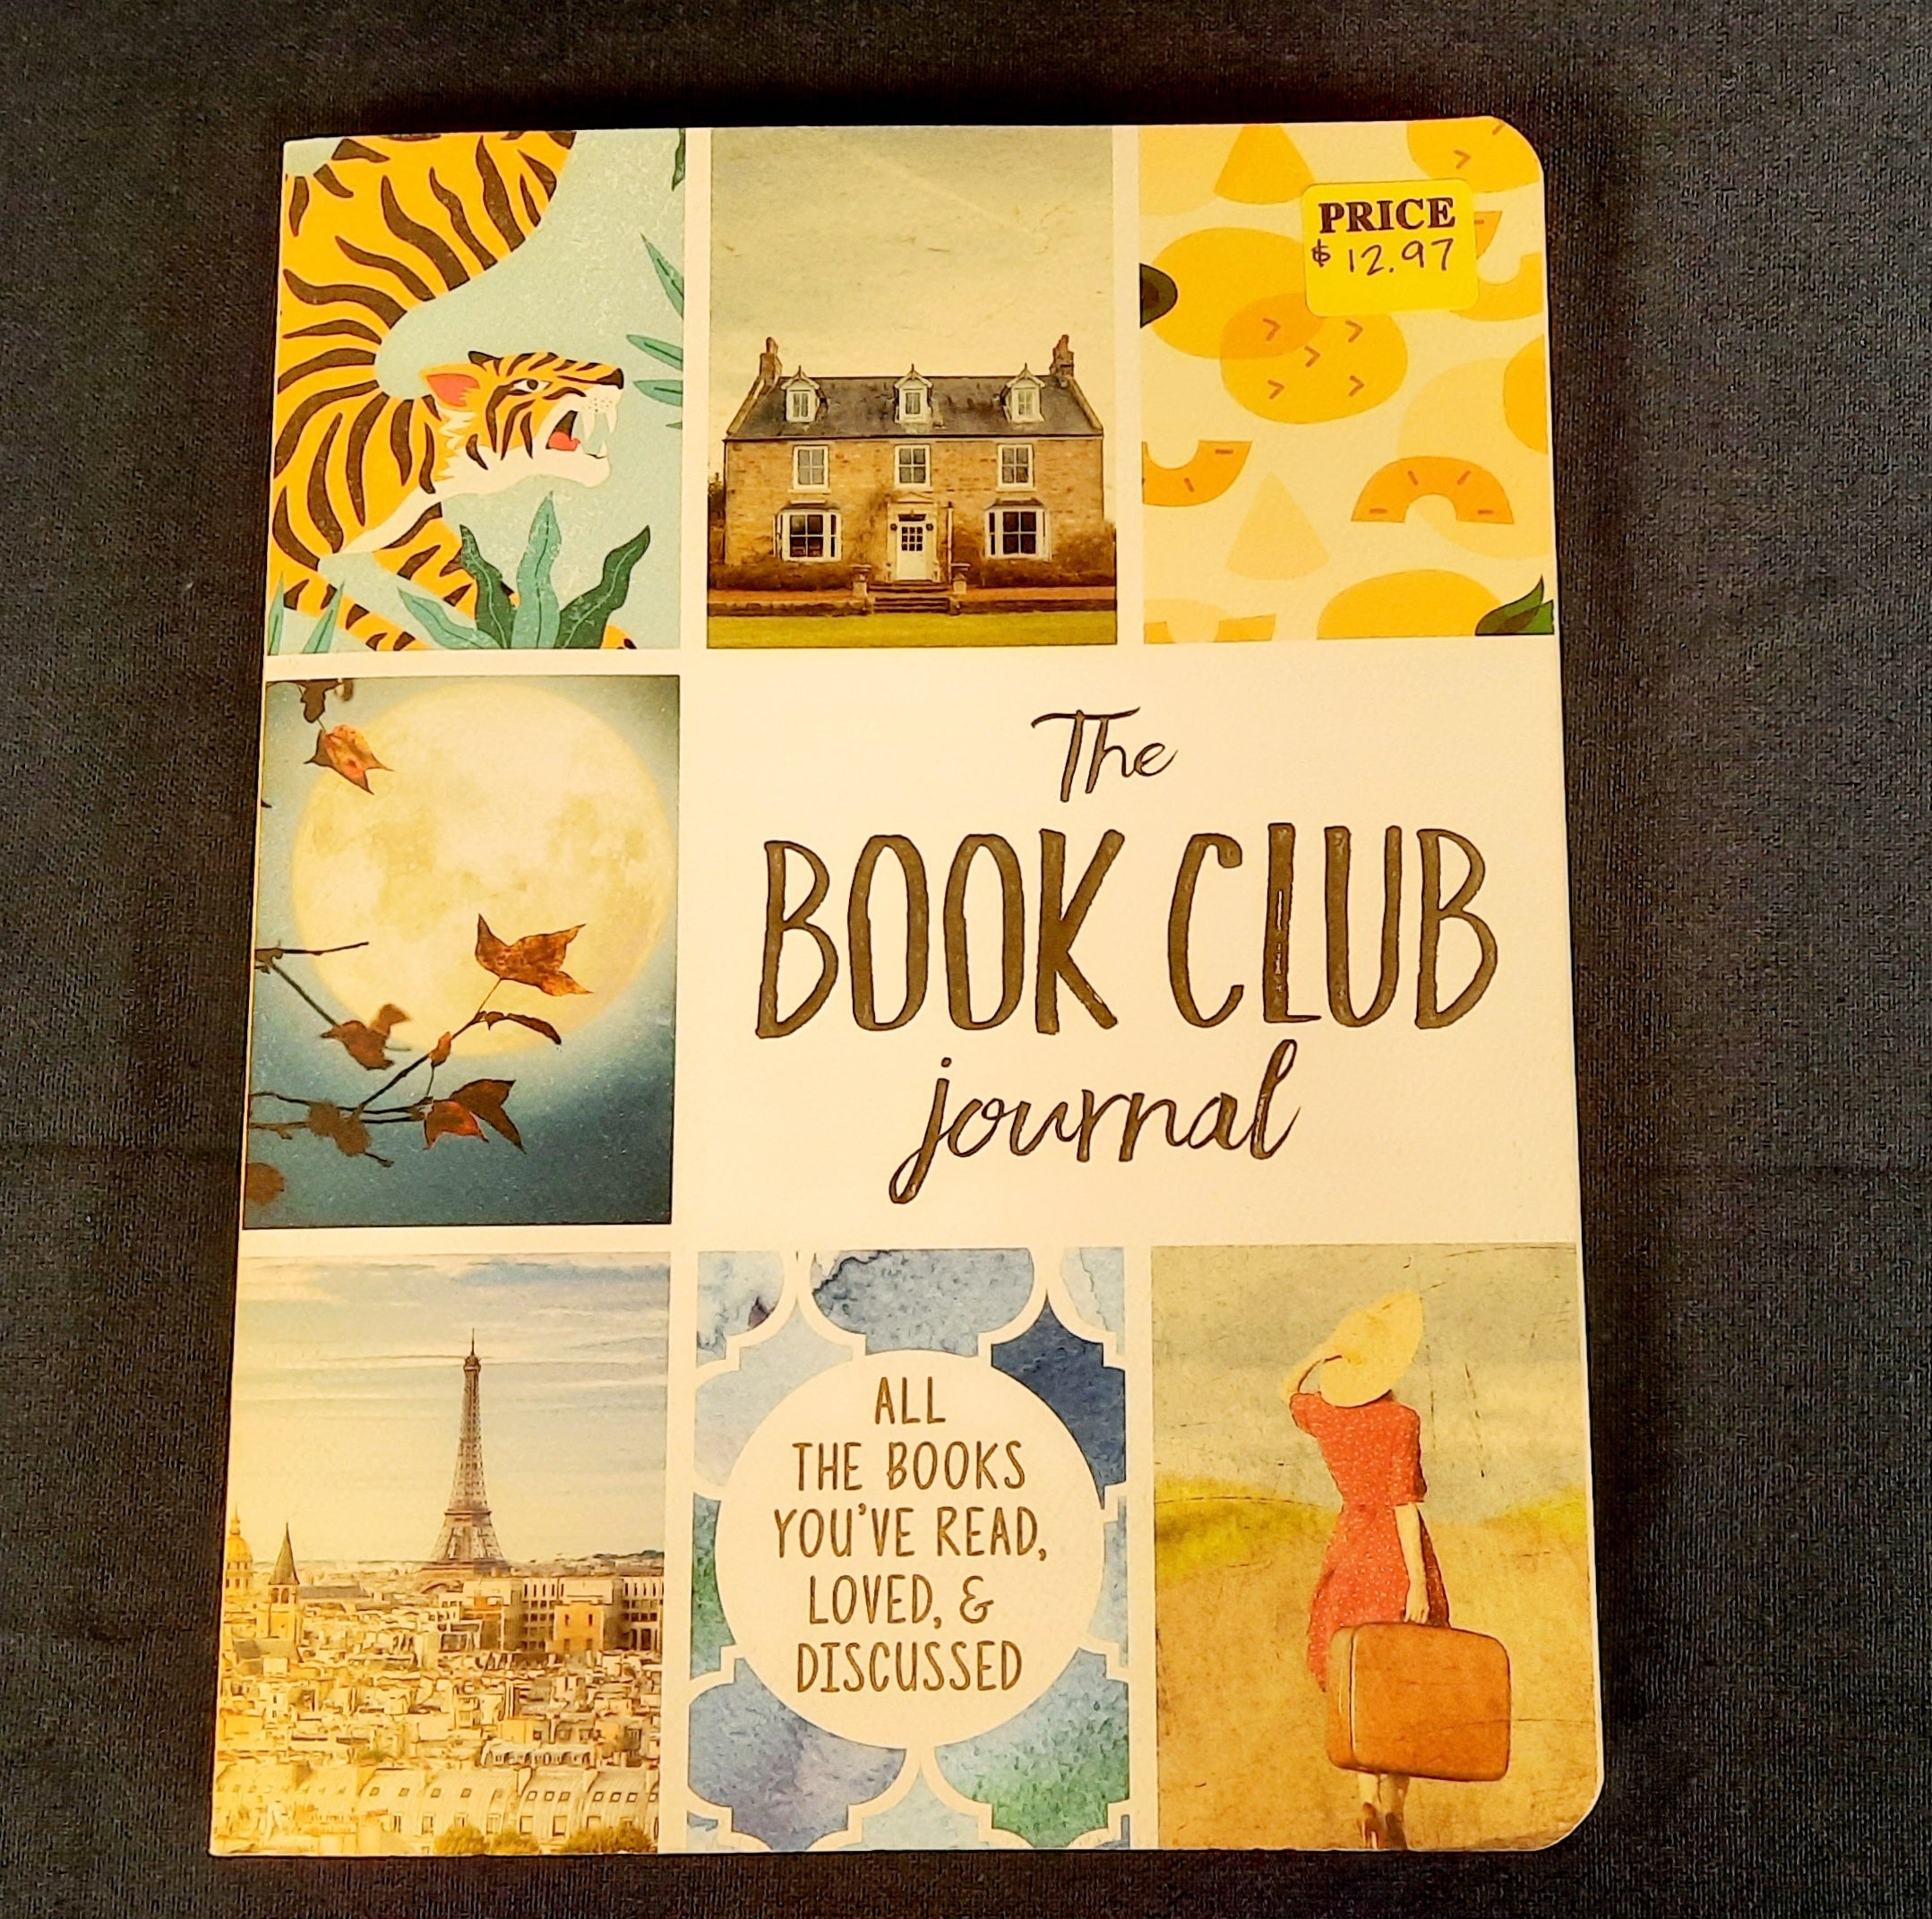 The Book Club Journal: All the Books You've Read, Loved